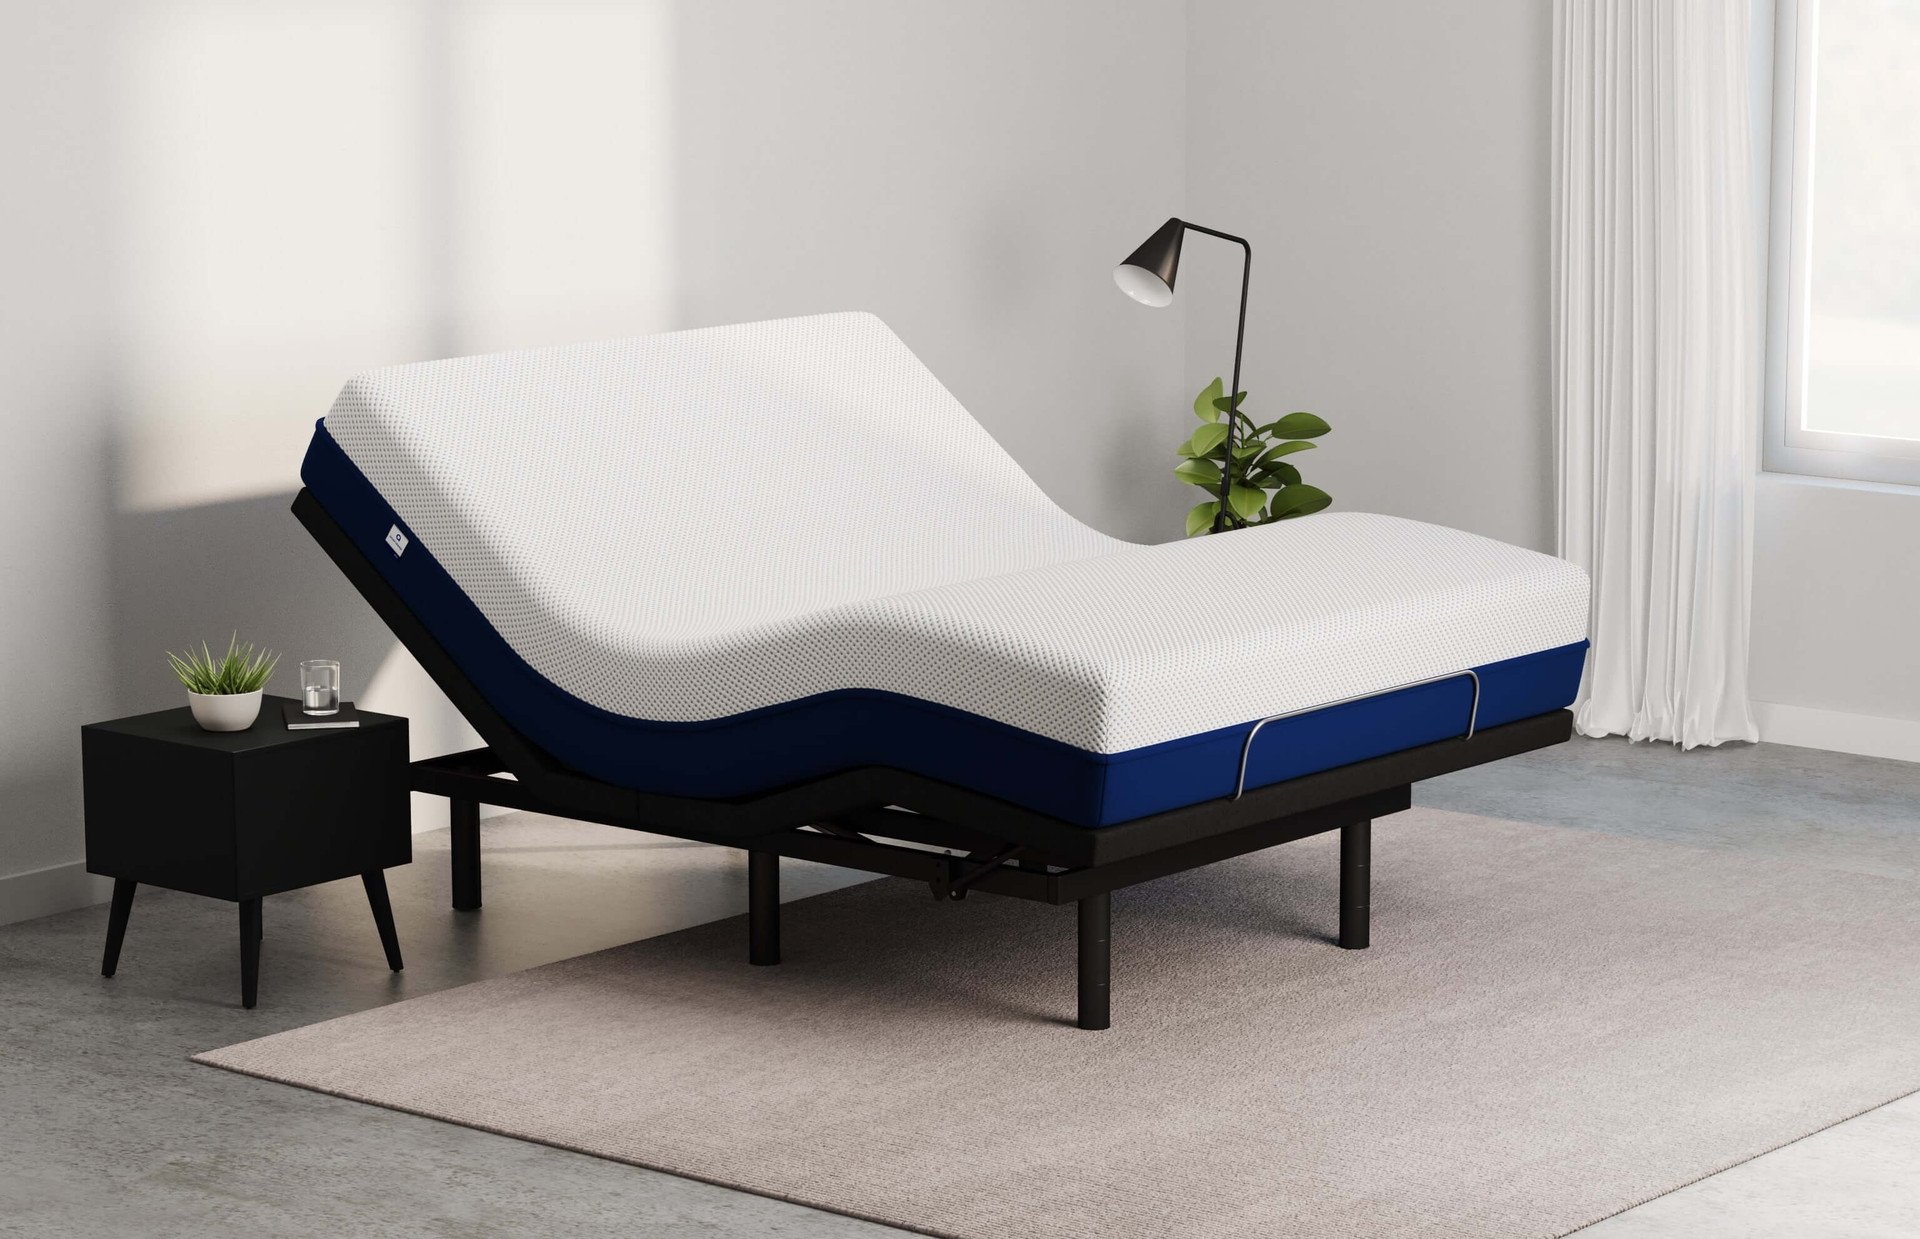 How Much Does an Adjustable Bed Frame Cost? platform bed, under bed led lighting, head and foot, split california king, underbed storage, twin xl